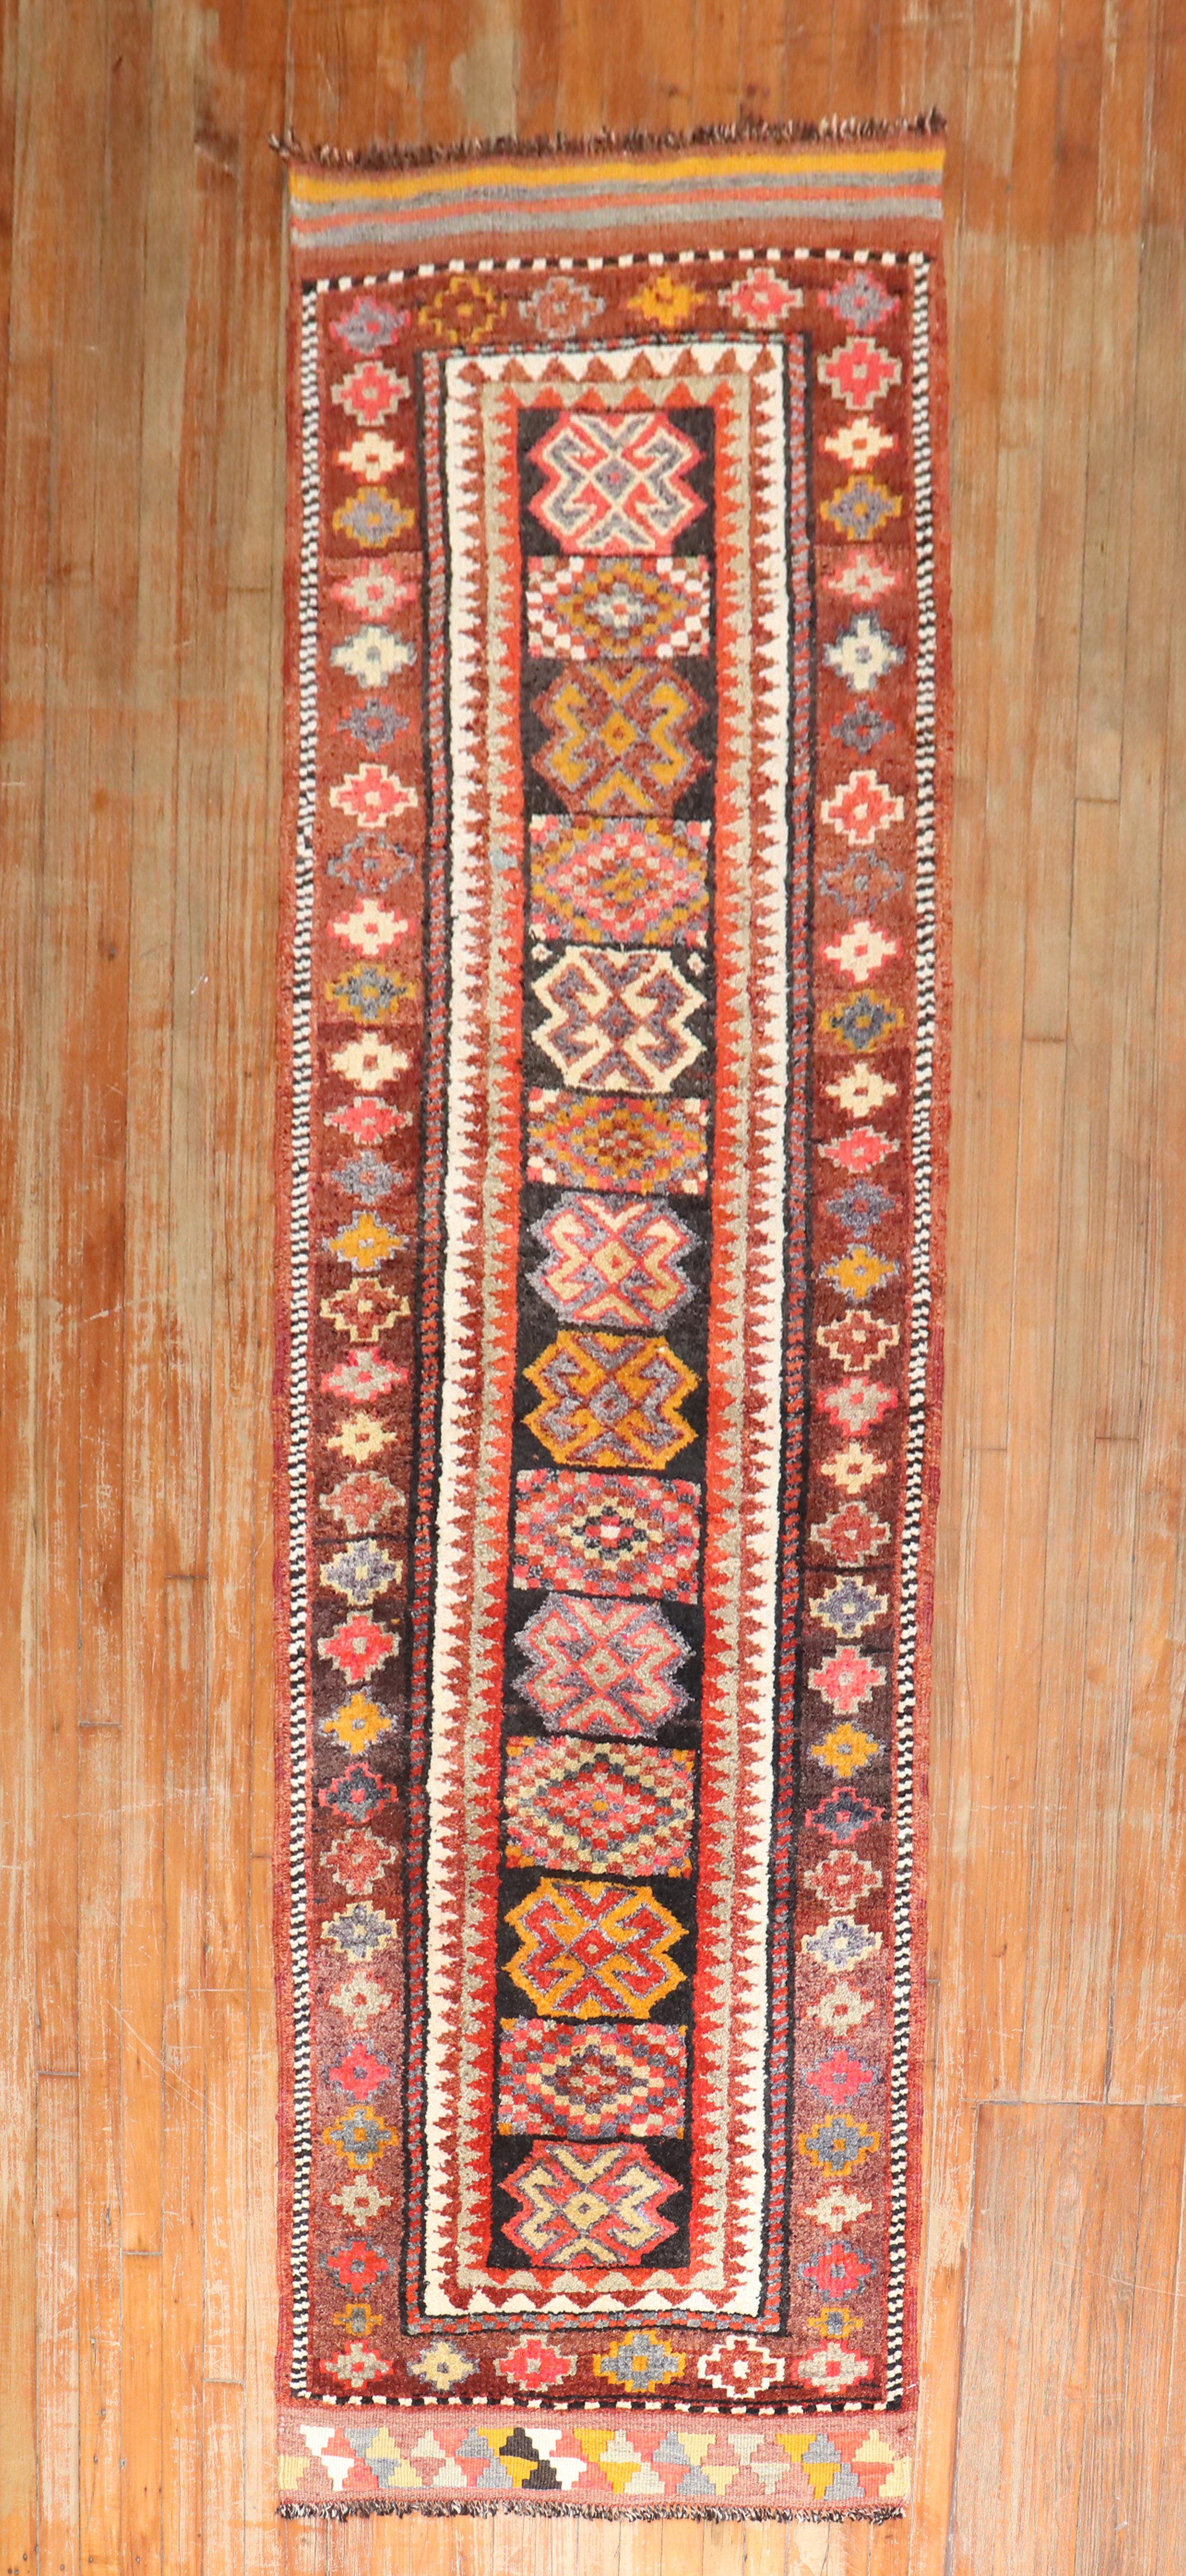 Tribal Turkish Geometric runner from the middle of the 20th century.

Measures: 2'10'' x 10'3''.